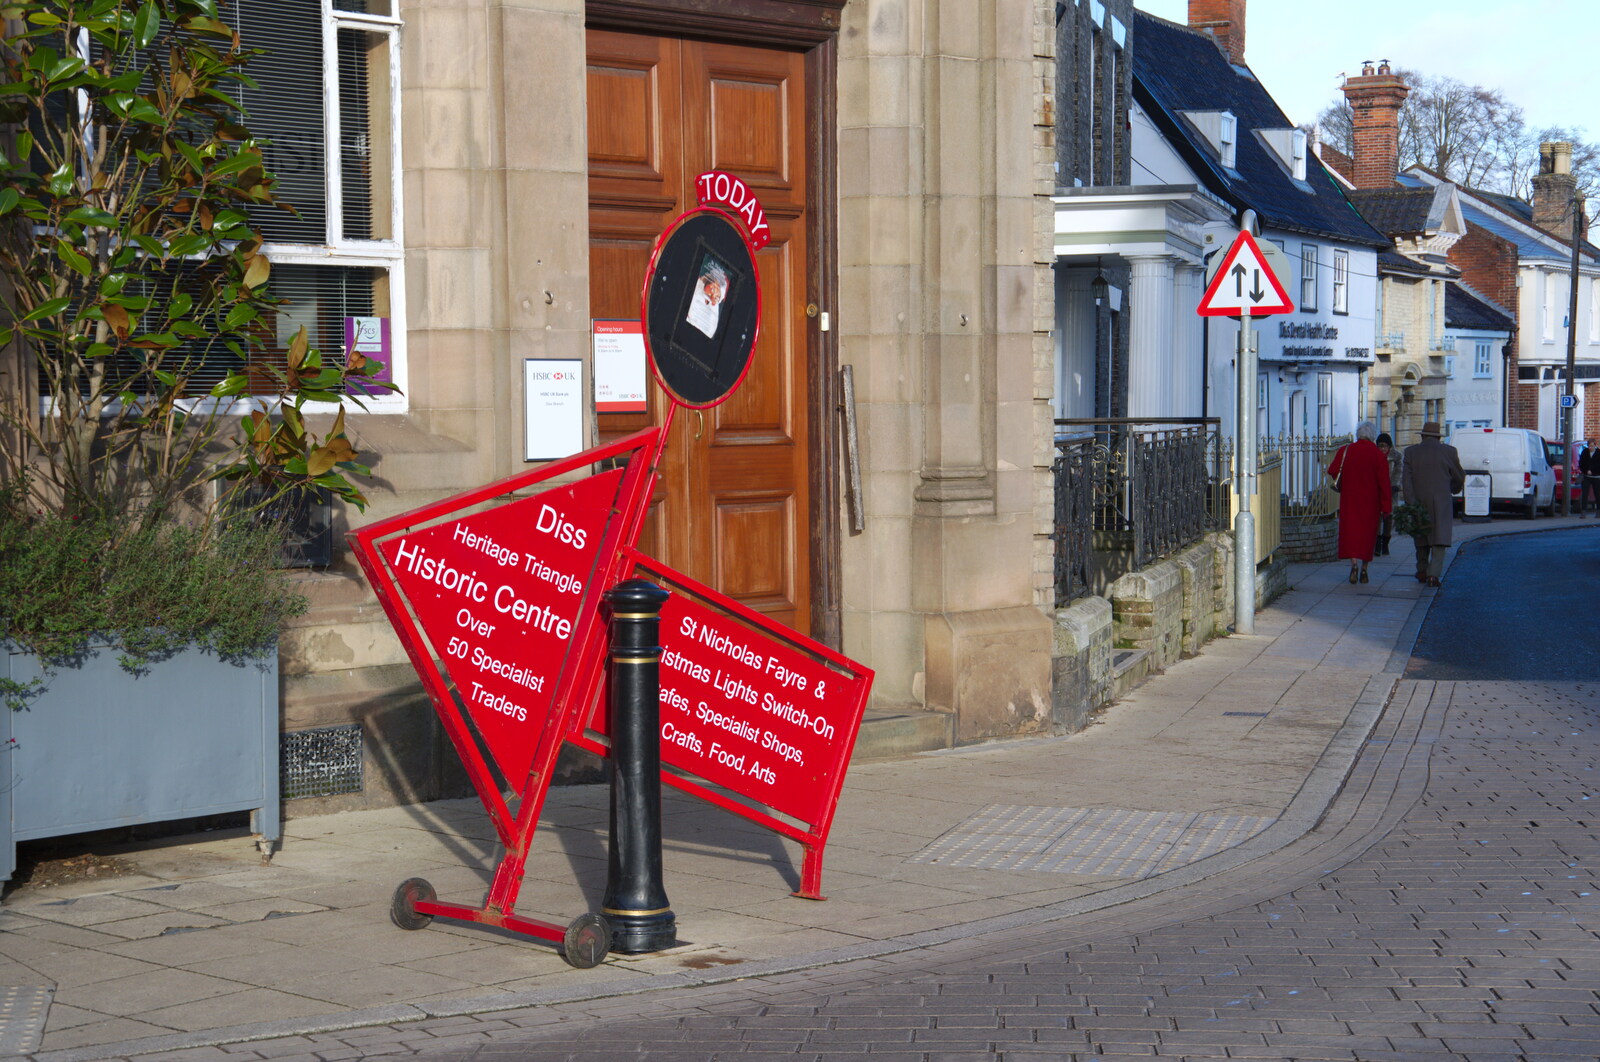 A sign points the way up St. Nicholas Street from The St. Nicholas Street Winter Fayre, Diss, Norfolk - 14th December 2019